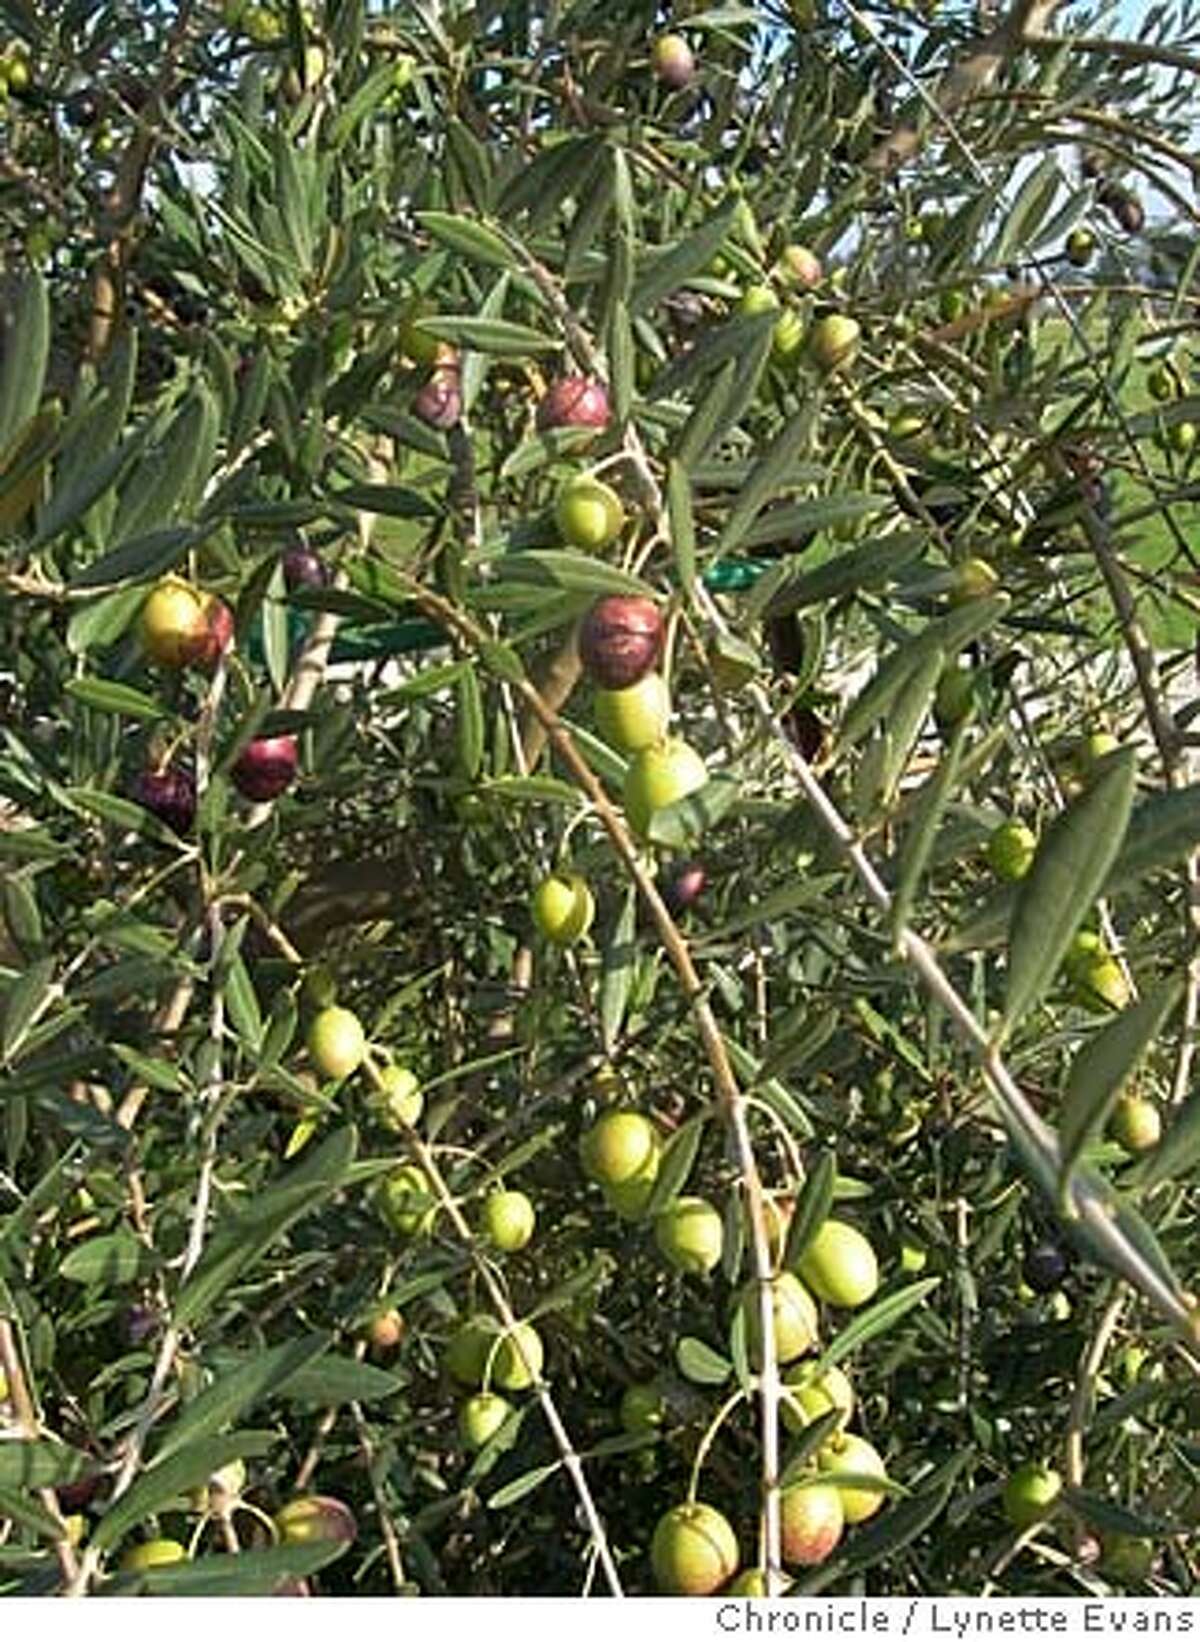 Green Spanish olives ready for picking.